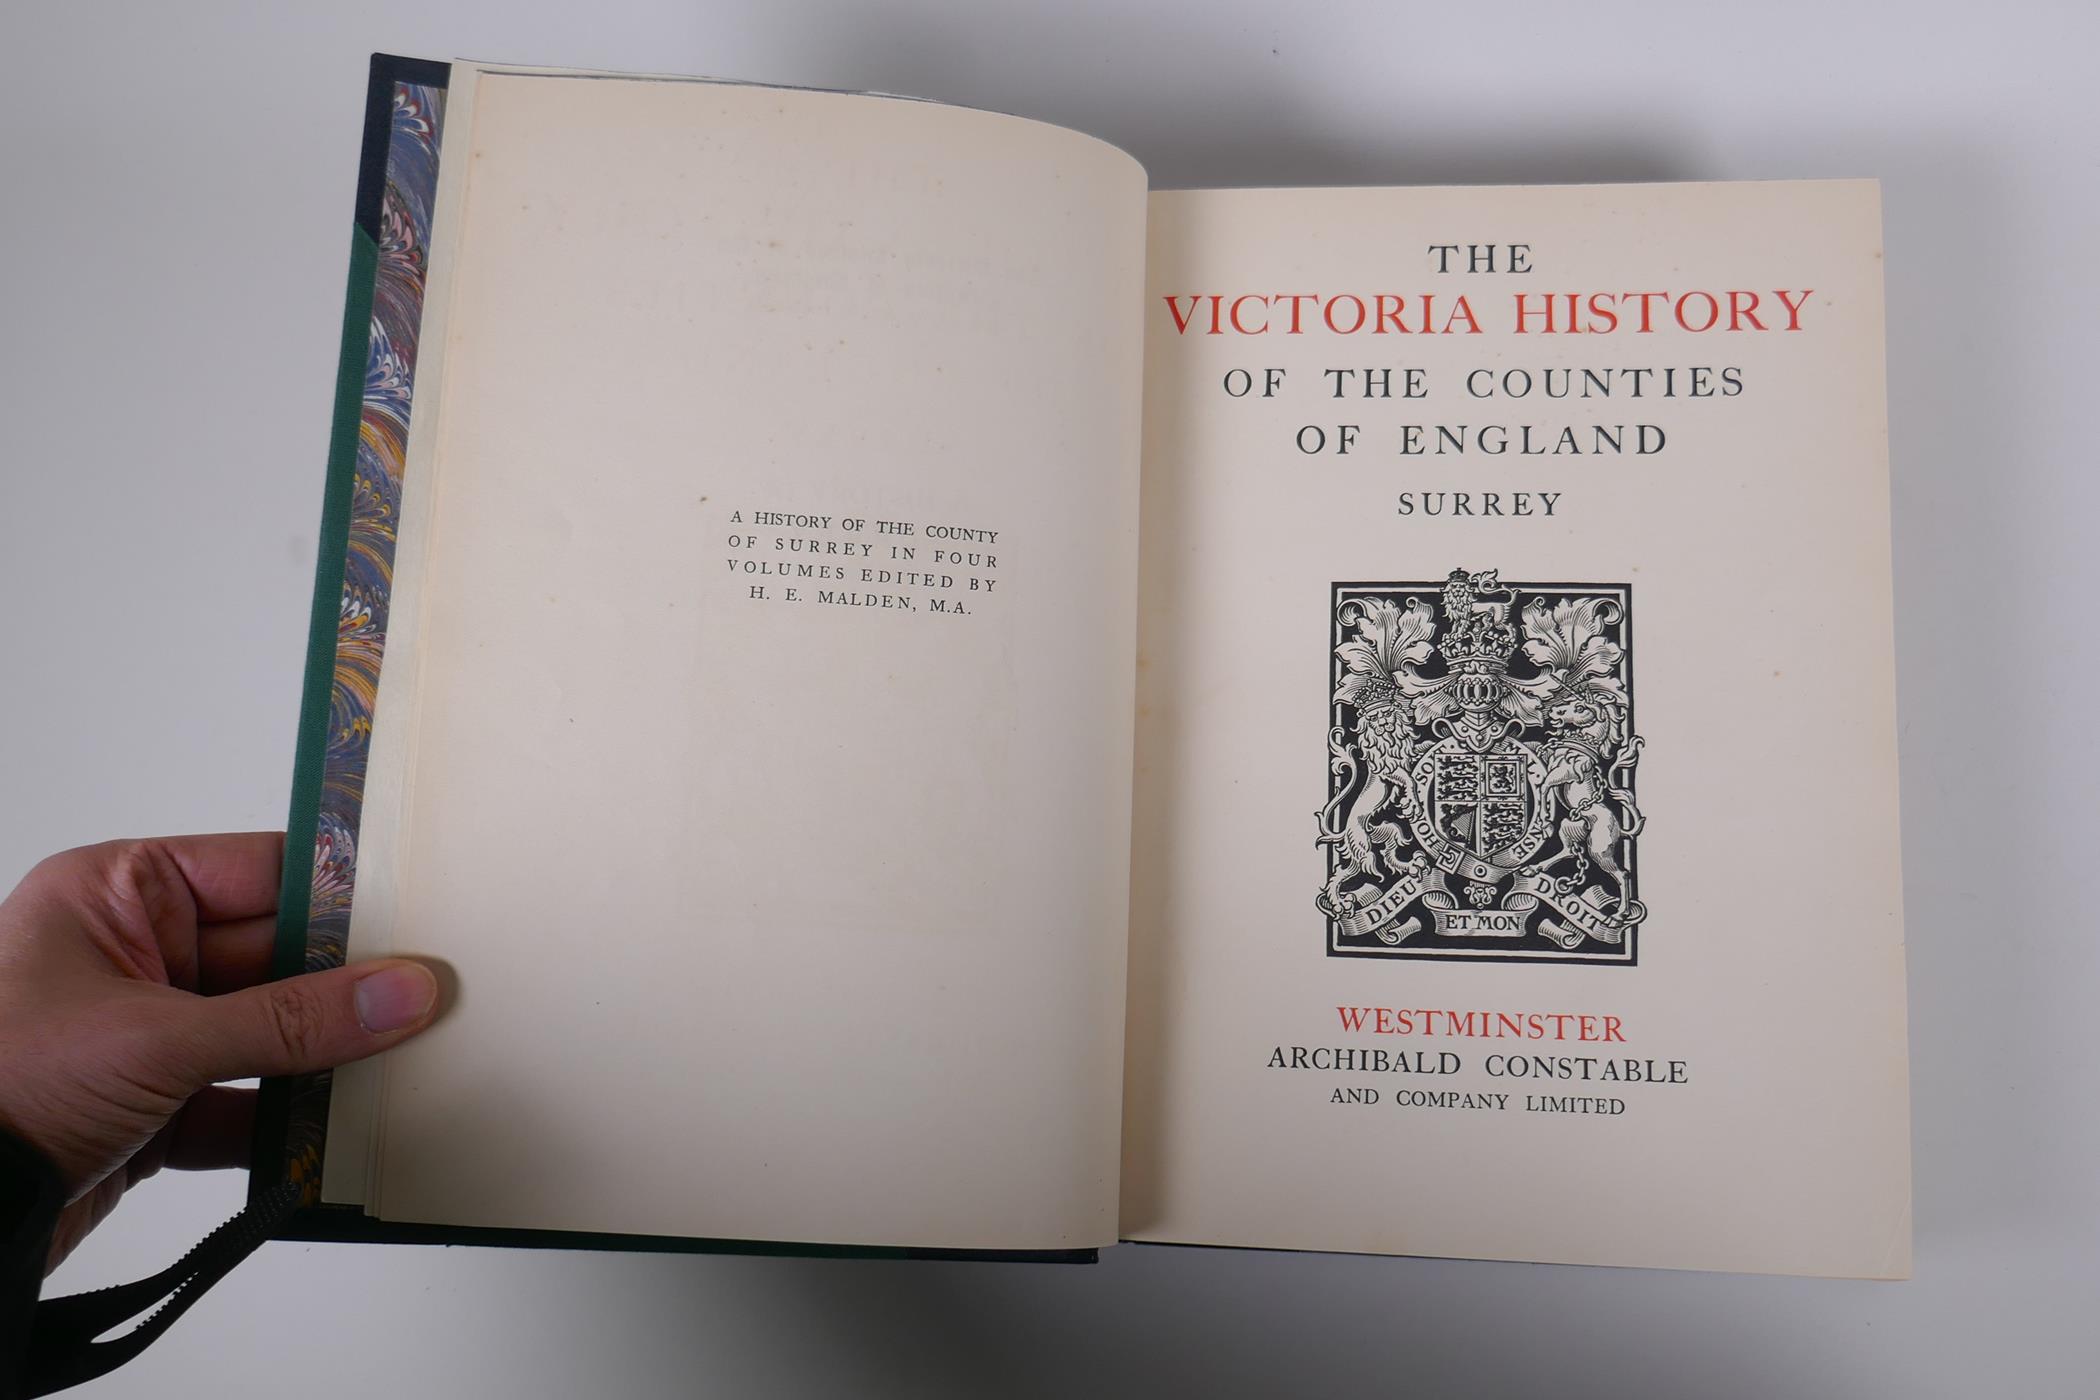 The Victoria History of the Counties of England, Surrey, Volume I, edited by H.E. Malden, - Image 3 of 6